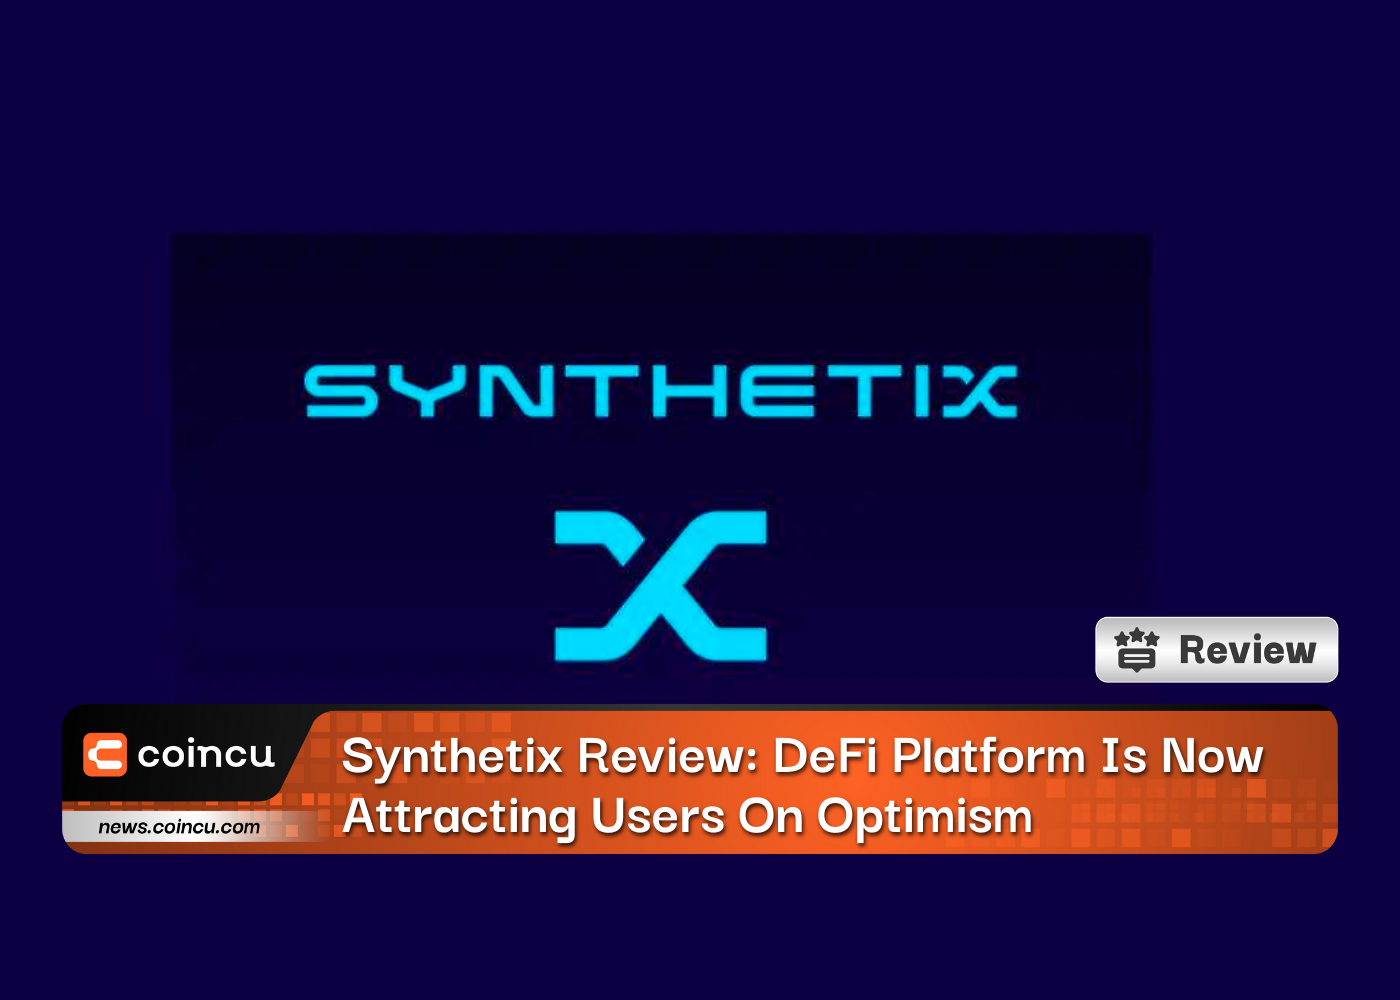 Synthetix Review: DeFi Platform Is Now Attracting Users On Optimism